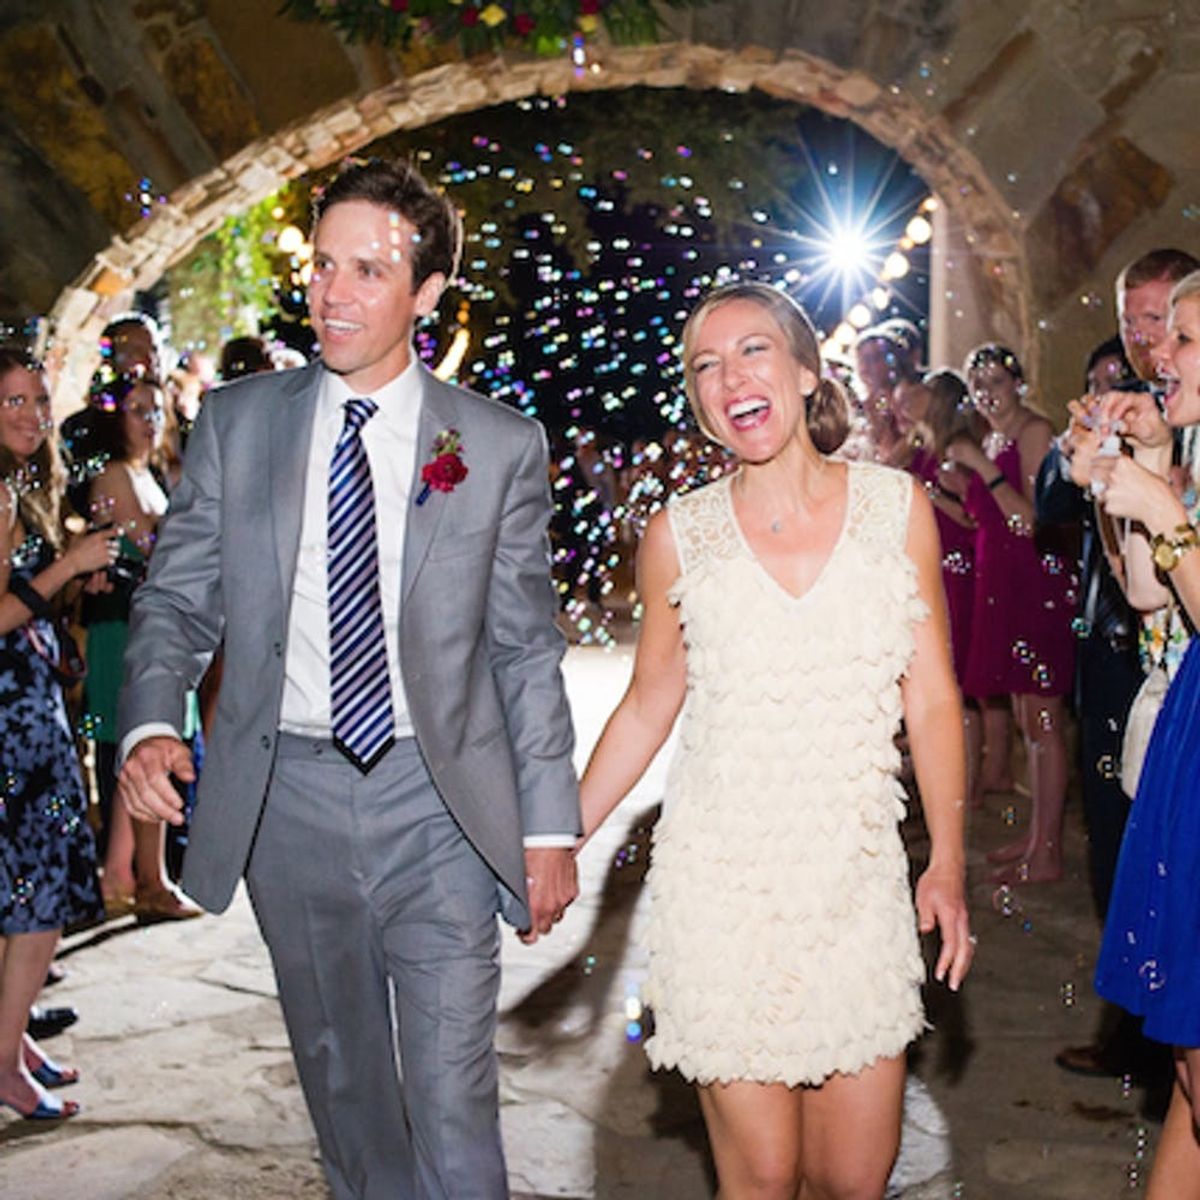 We Can’t Stop Smiling Over This Colorful DIY Wedding in Texas